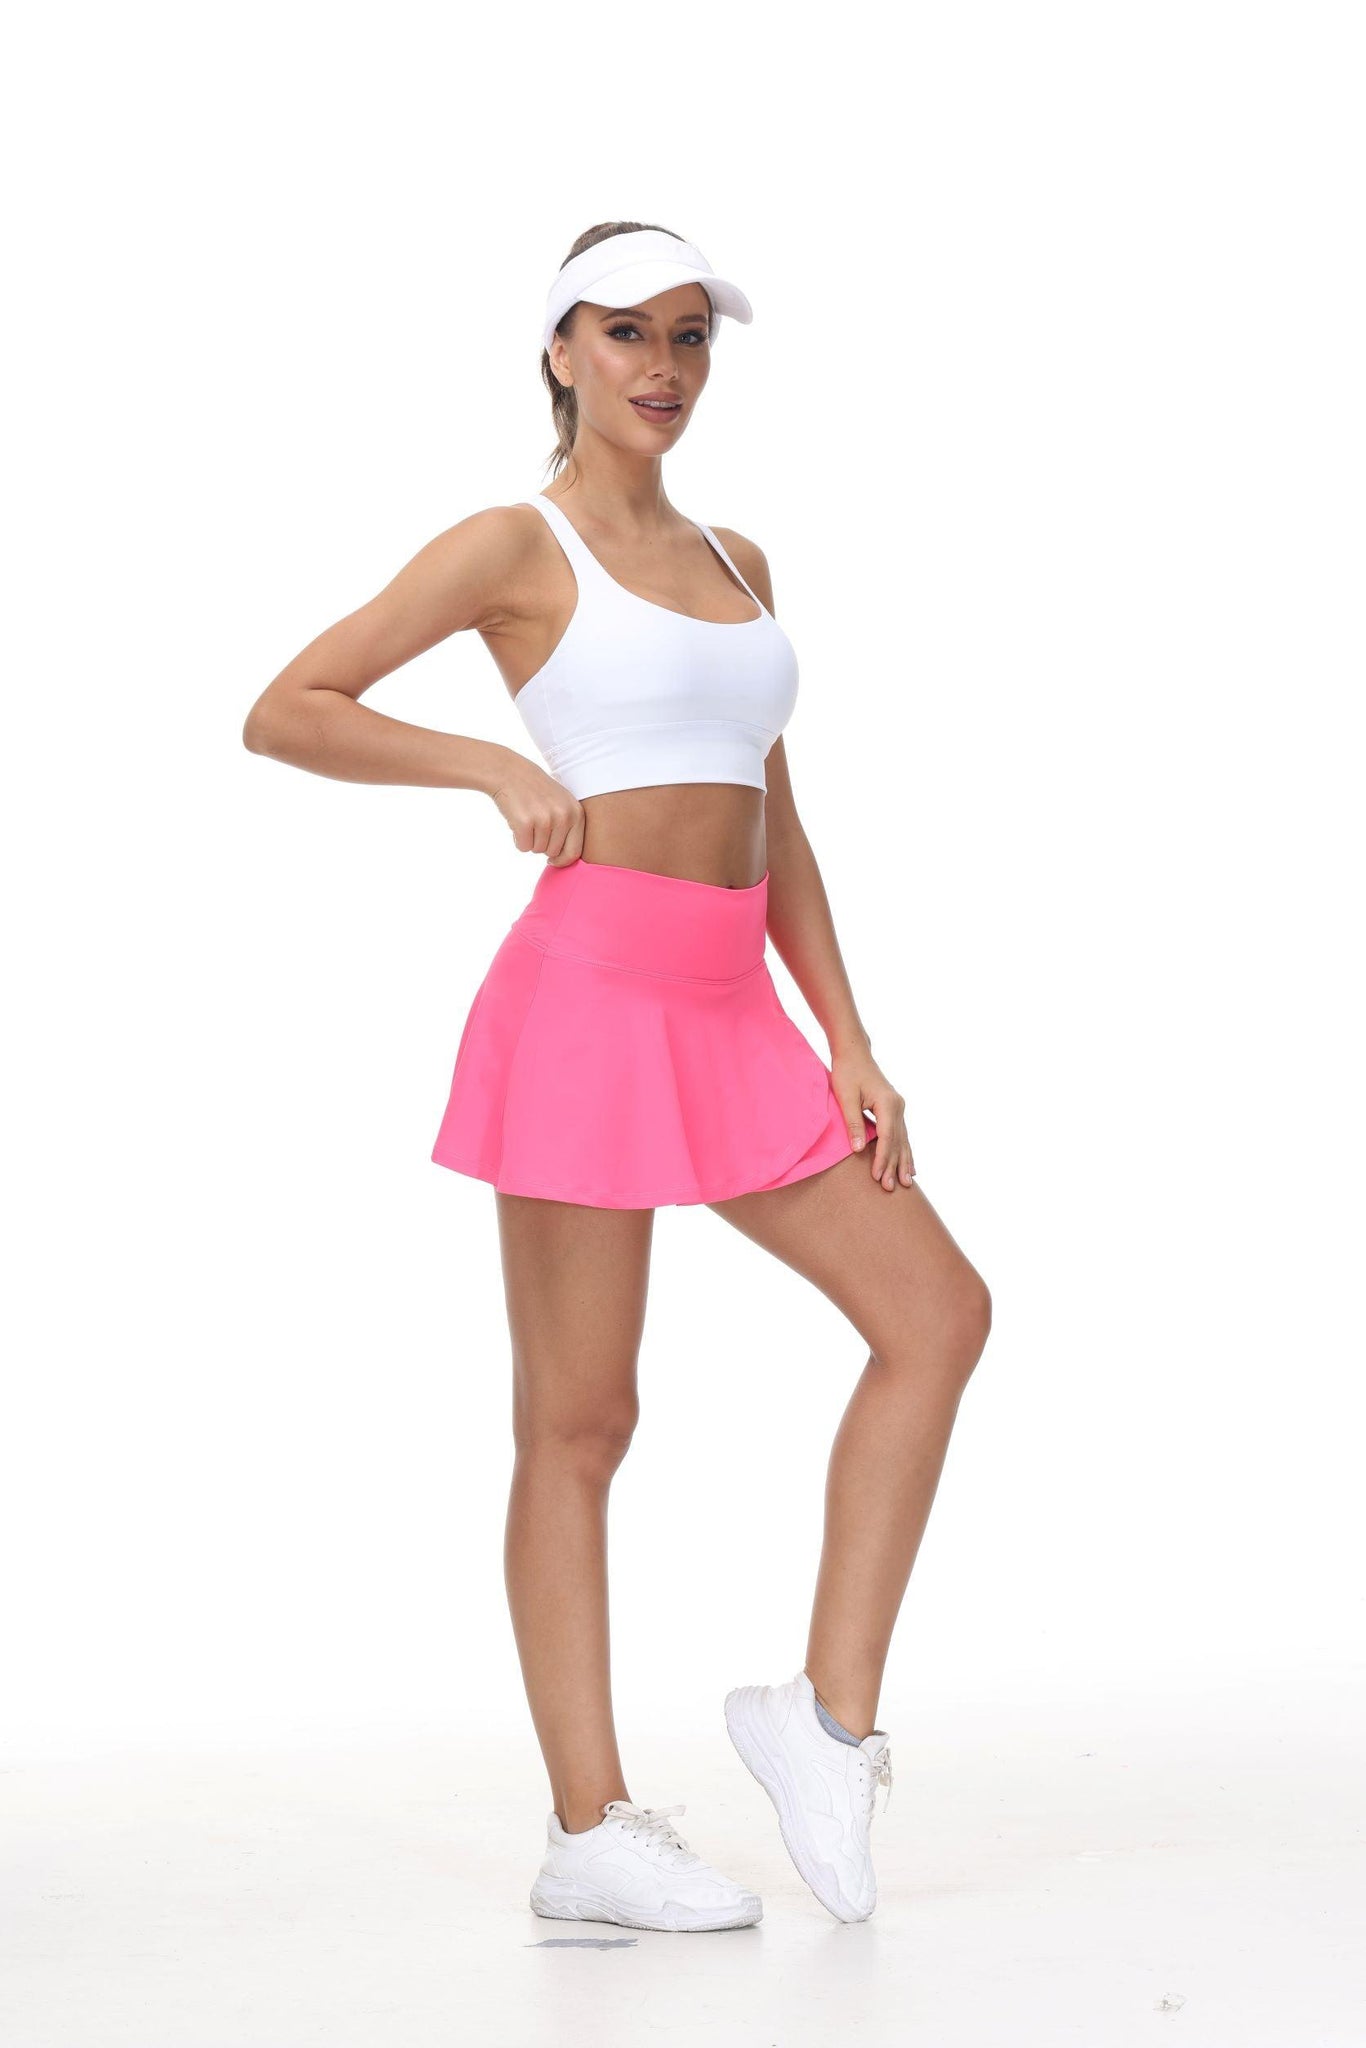 That's Hot Pink Ladies Tennis, Golf and Pickleball Skirt - Millie Rose Designs